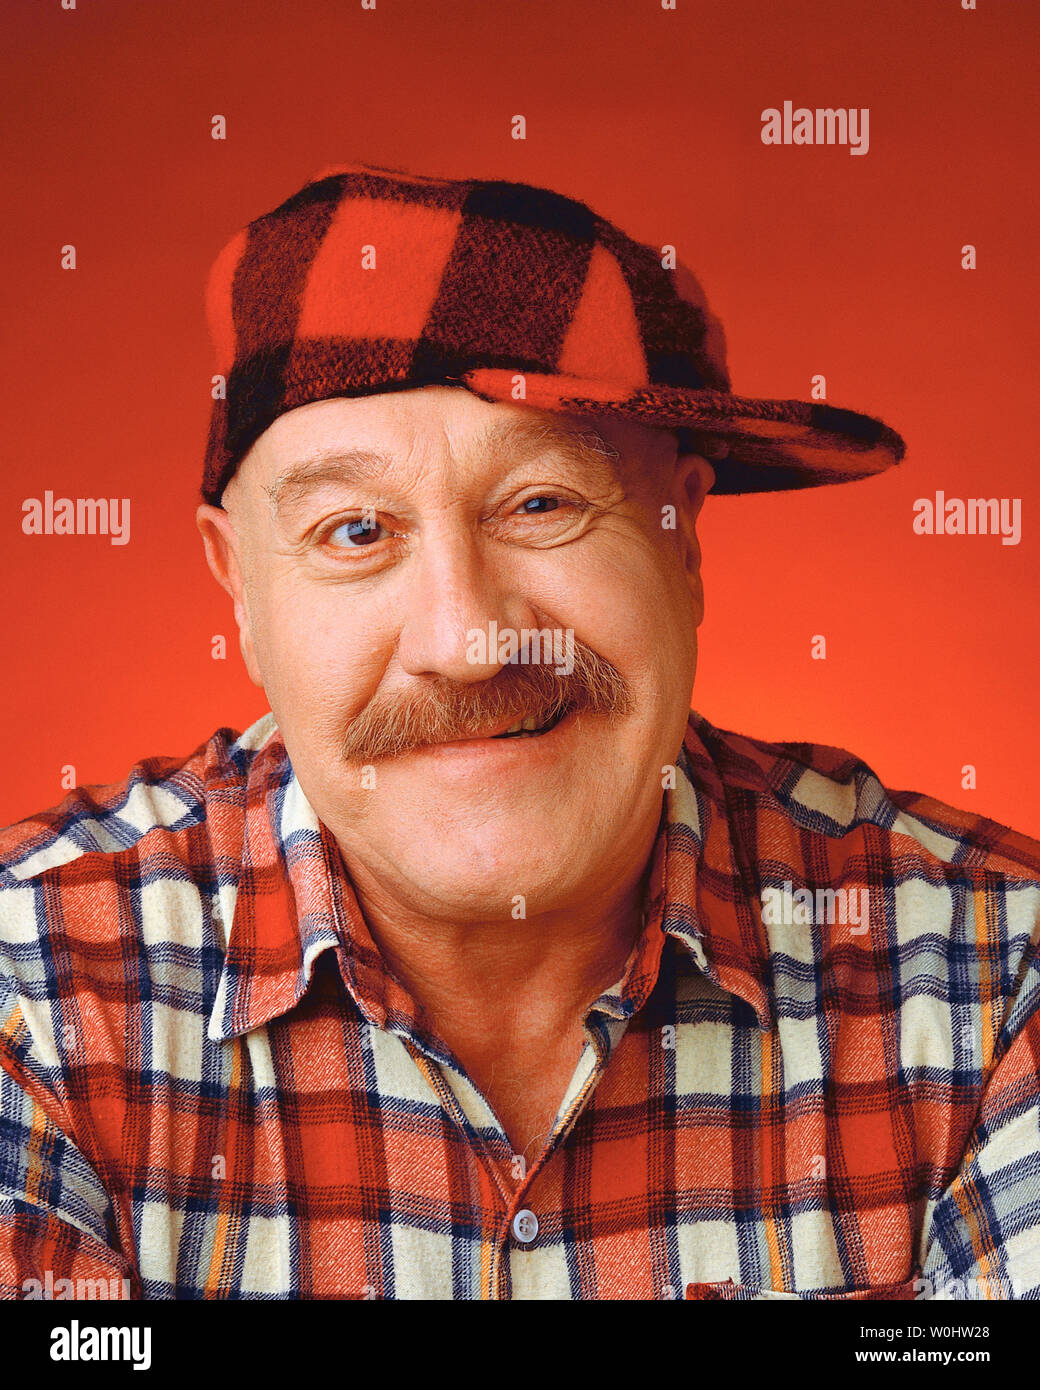 Funny looking man wearing a plaid shirt and Looking silly Stock Photo -  Alamy